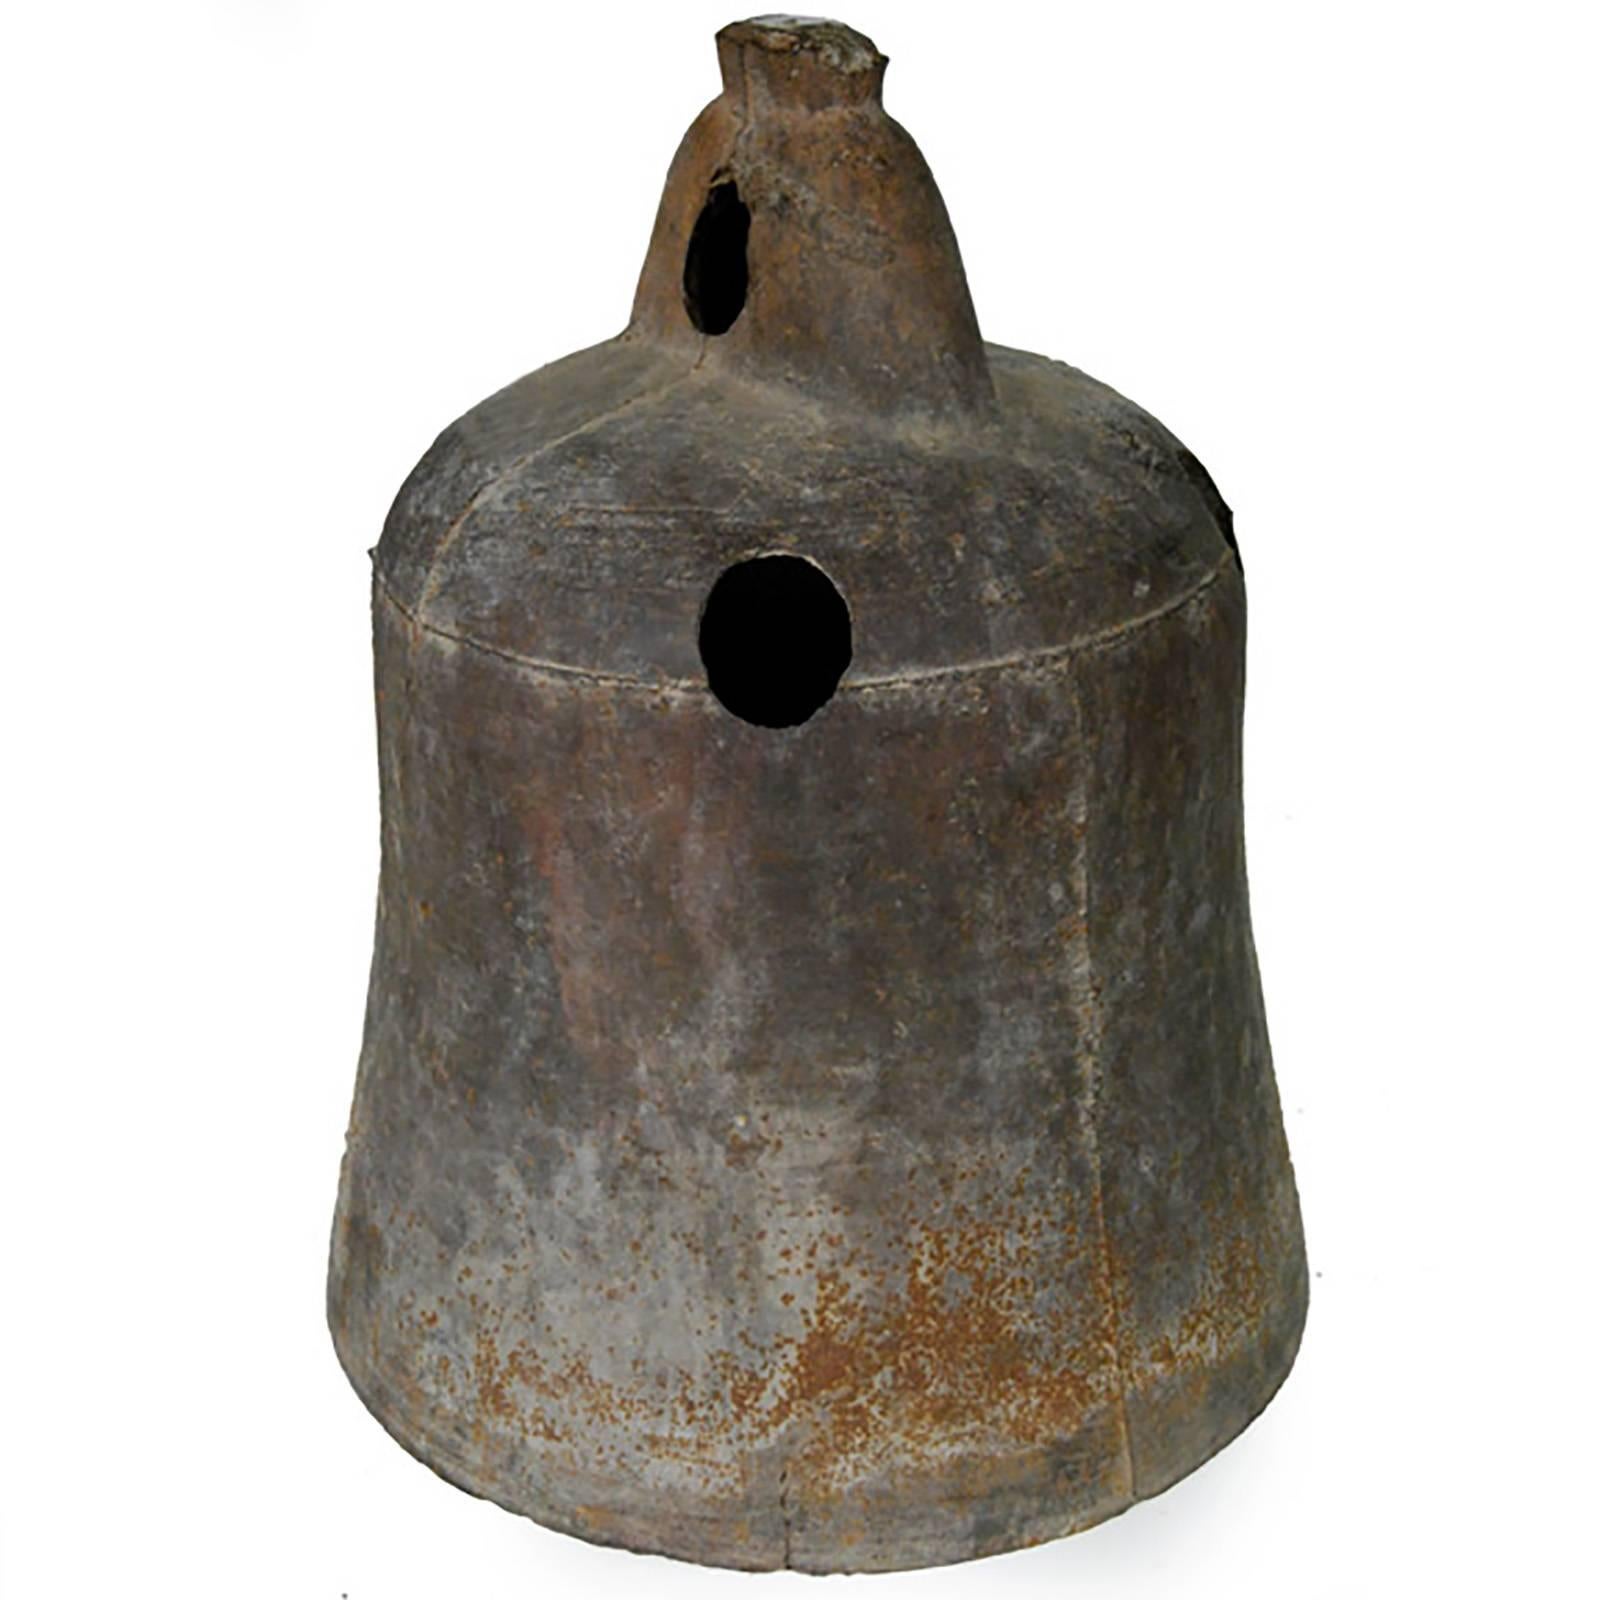 This rustic, 19th-century iron bell once pealed in celebration or gave notice of important events in a town in northern China. Marked with holes to affix the clapper or insert a pole, the bell looks lovely lit from within by a flickering candle or